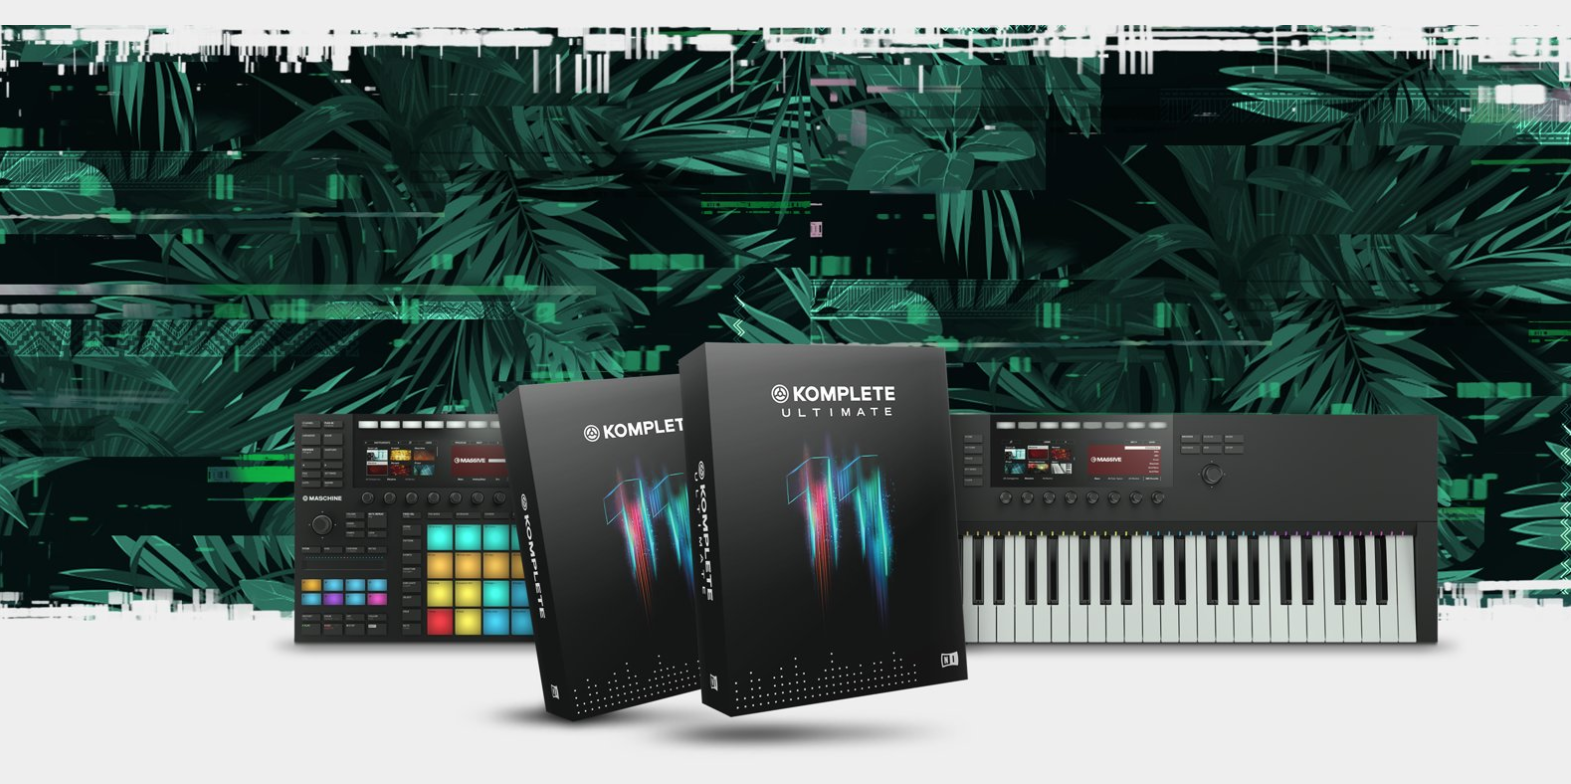 NI Summer Sale offers up to 500 off bestinclass Mac music production